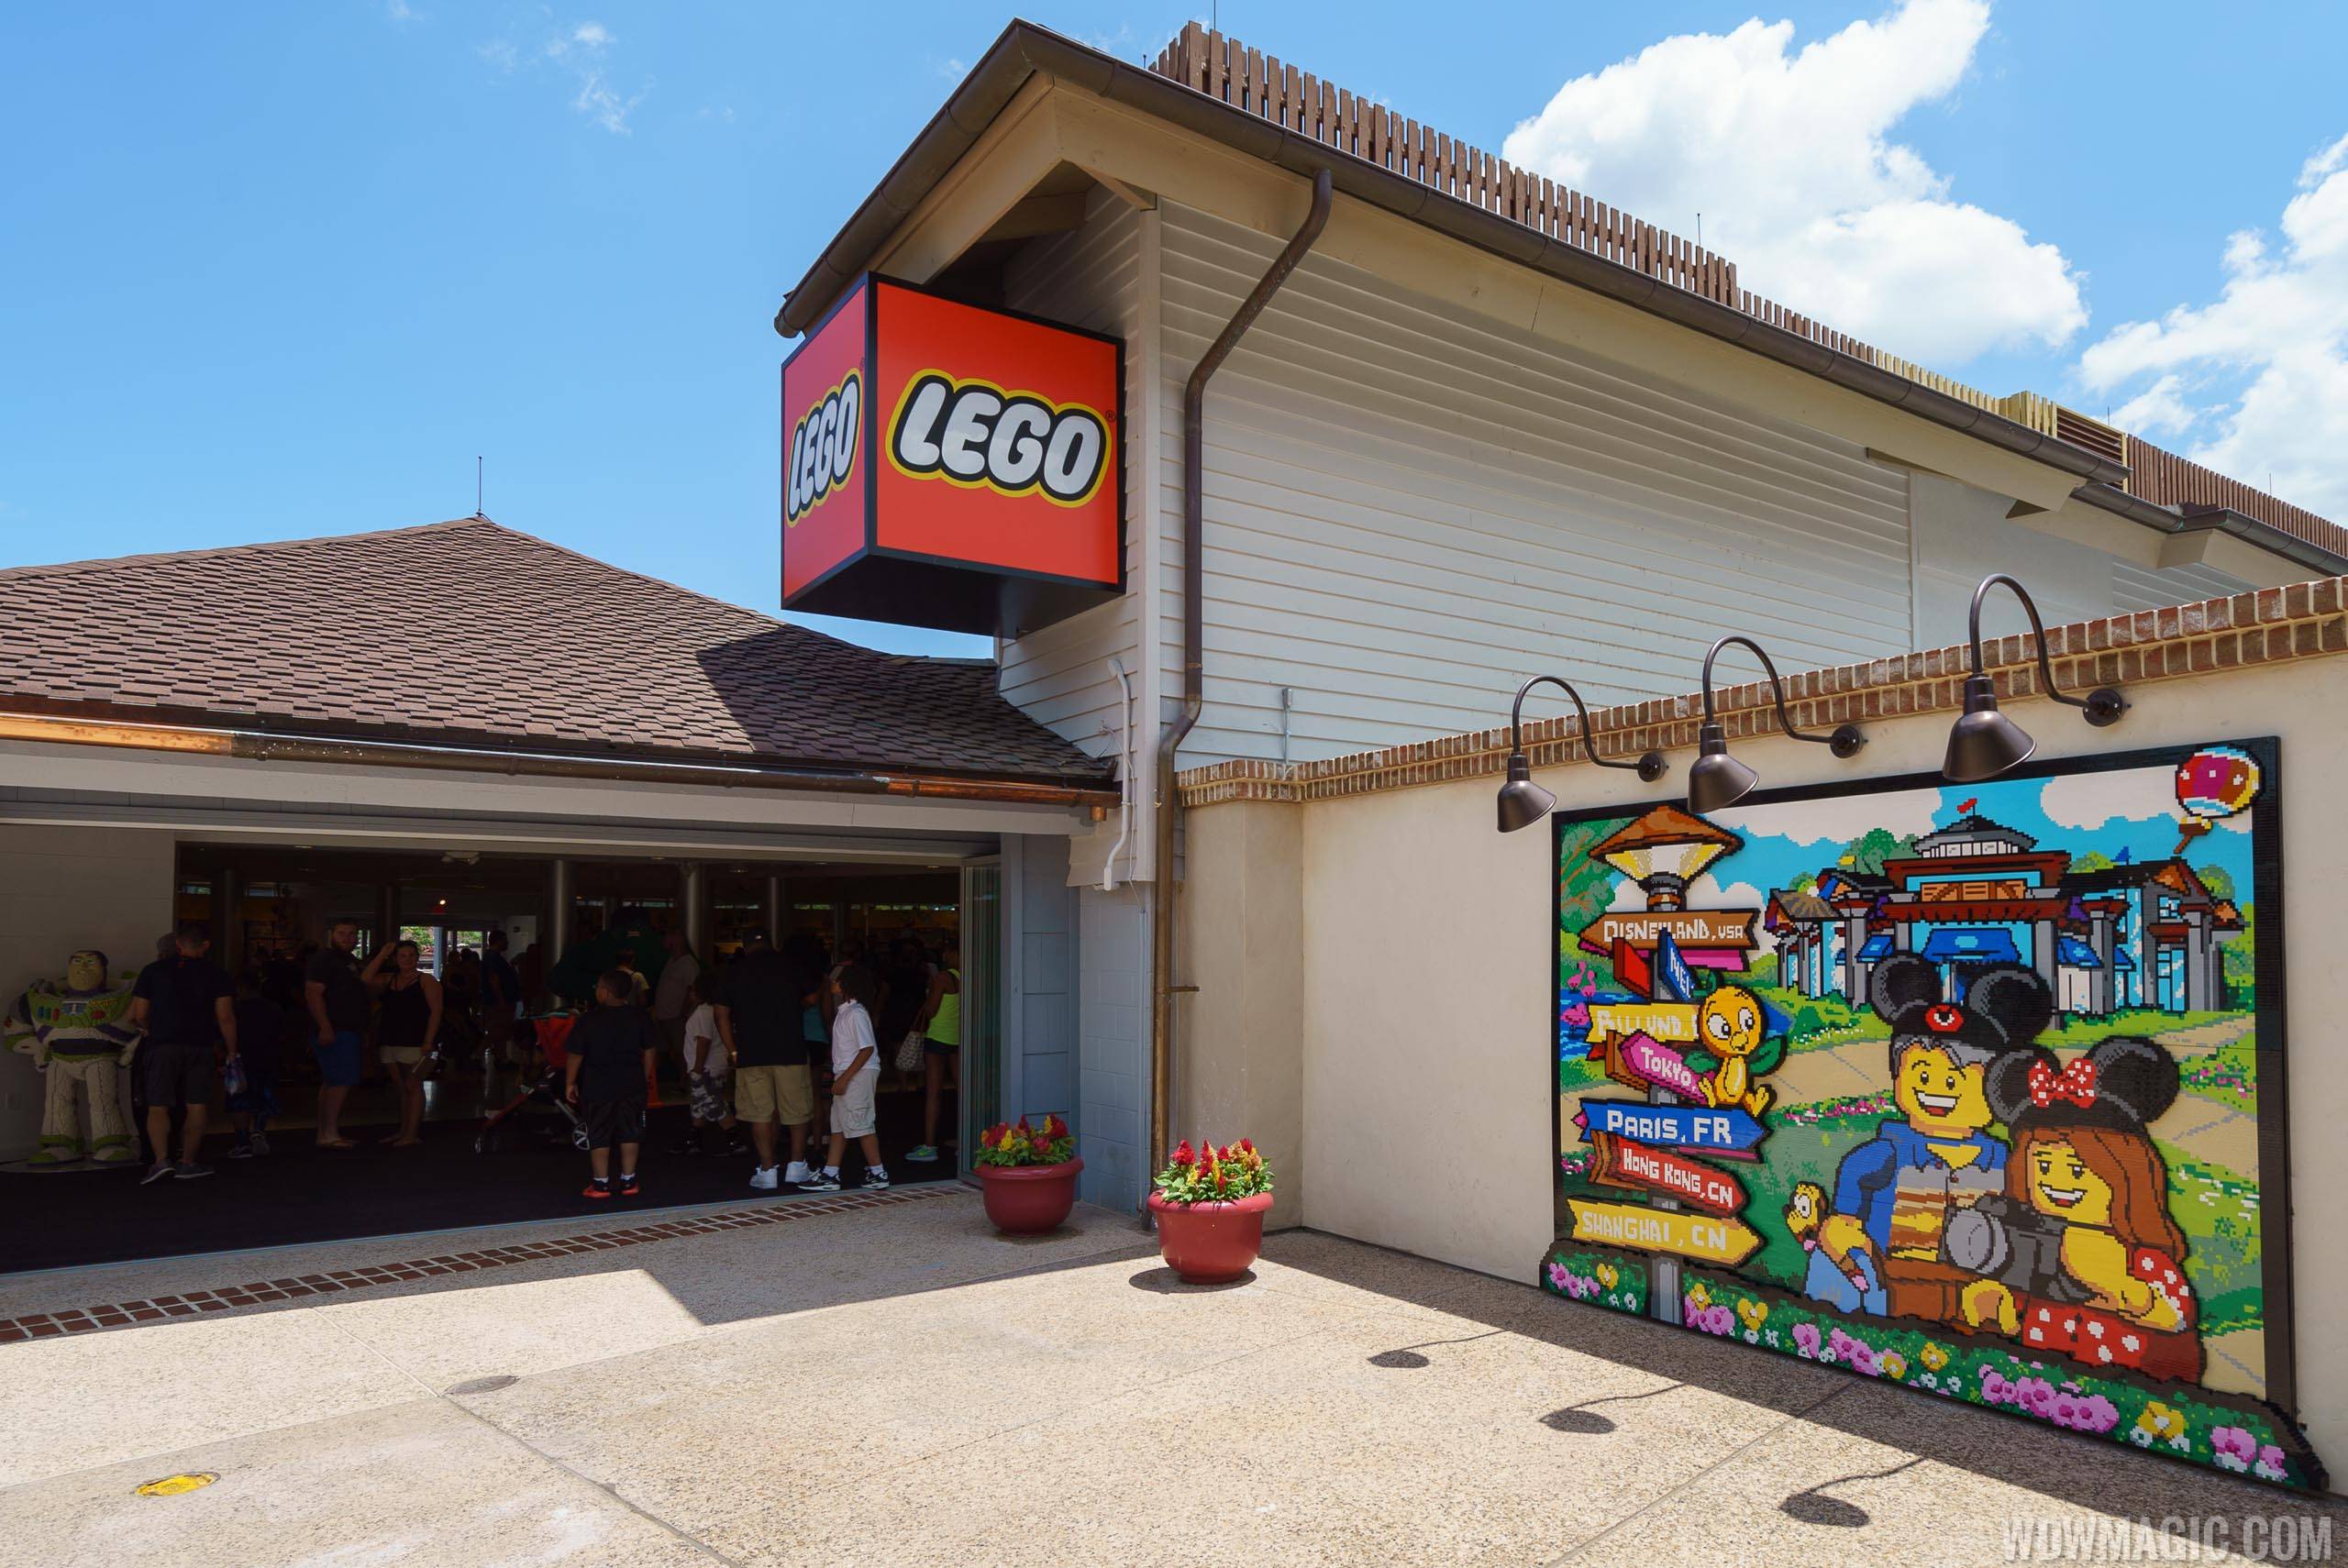 New exterior paint scheme at The LEGO Store